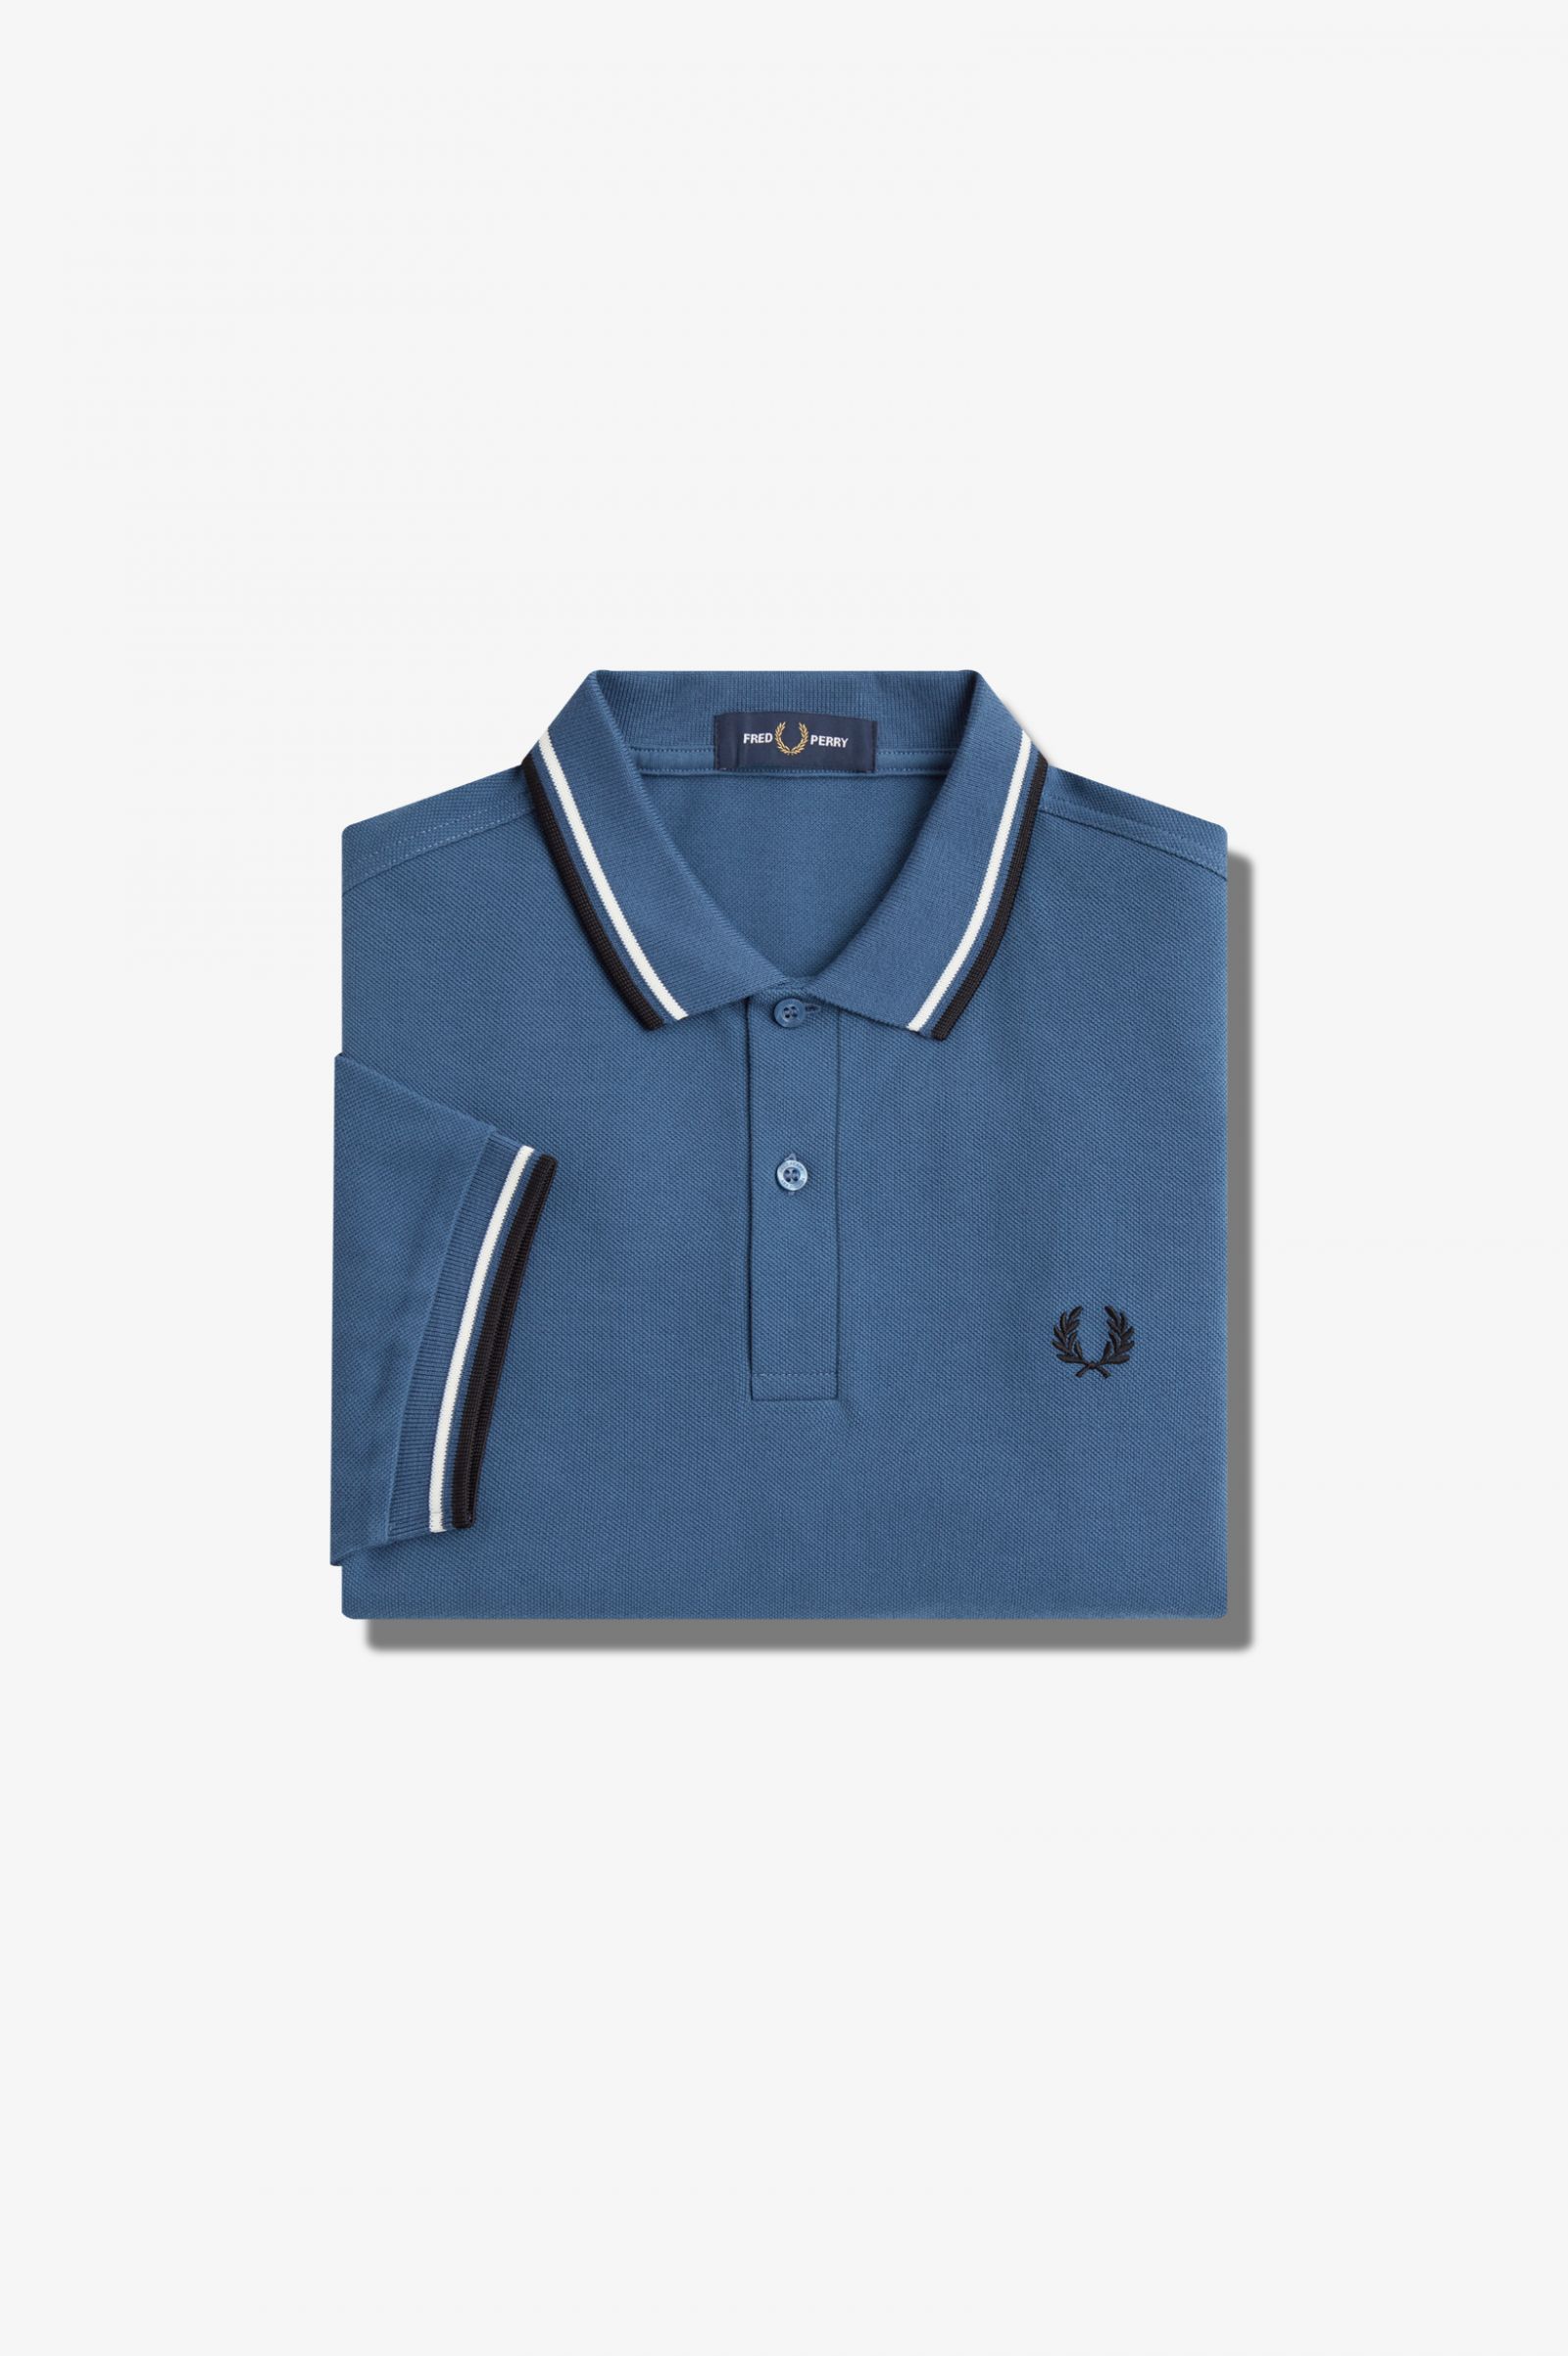 M3600 - Midnight Blue / Snow White / Black | The Fred Perry Shirt 